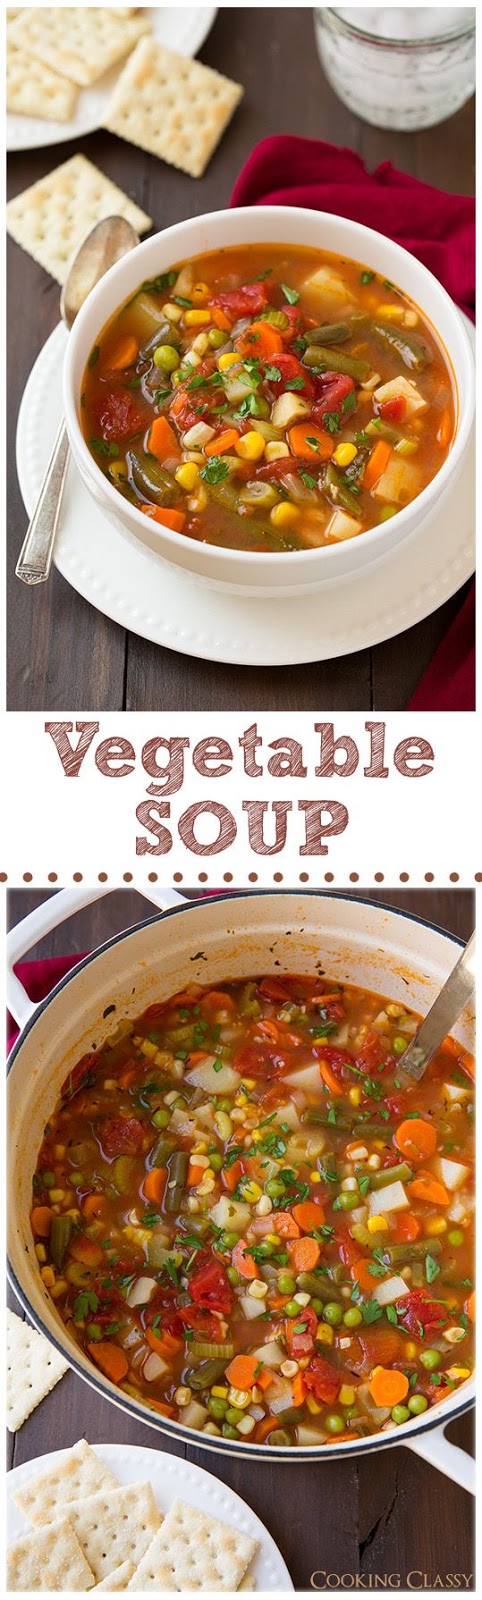 Vegetable Soup - "100x better than the canned stuff! This soup is amazing, I had 3 bowls!" I'm on a soup kick and this sounds delicious.